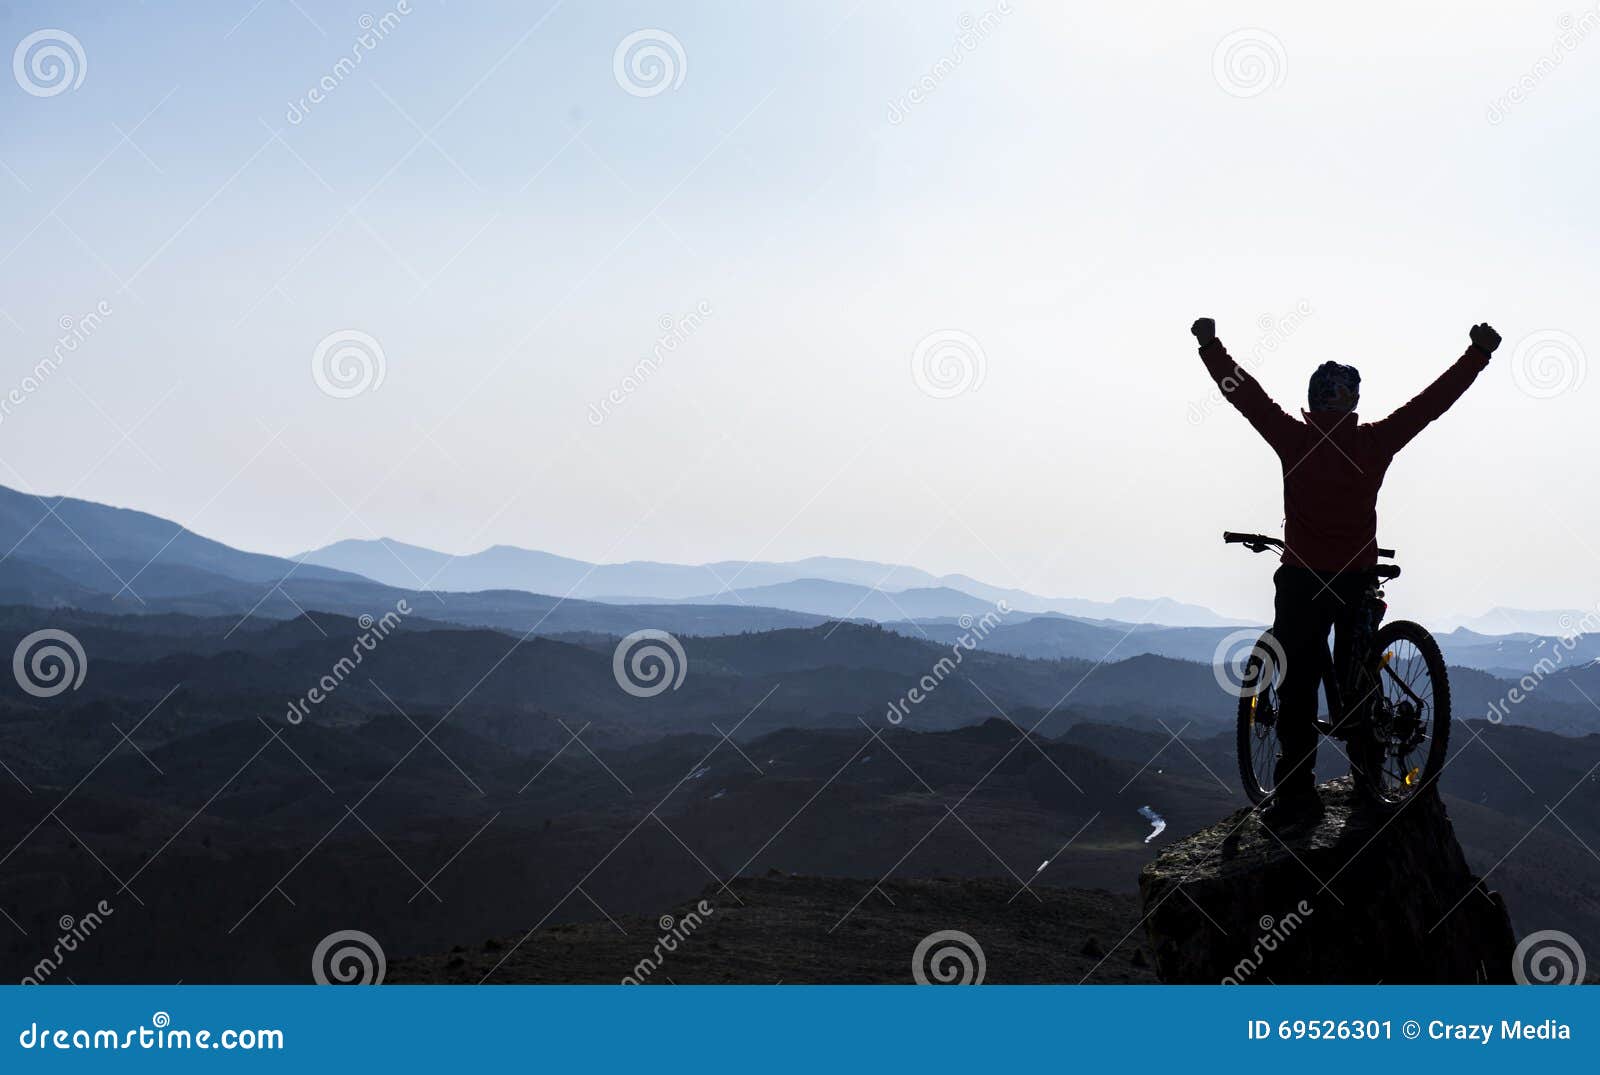 enthusiasm the success of the summits bike difficult